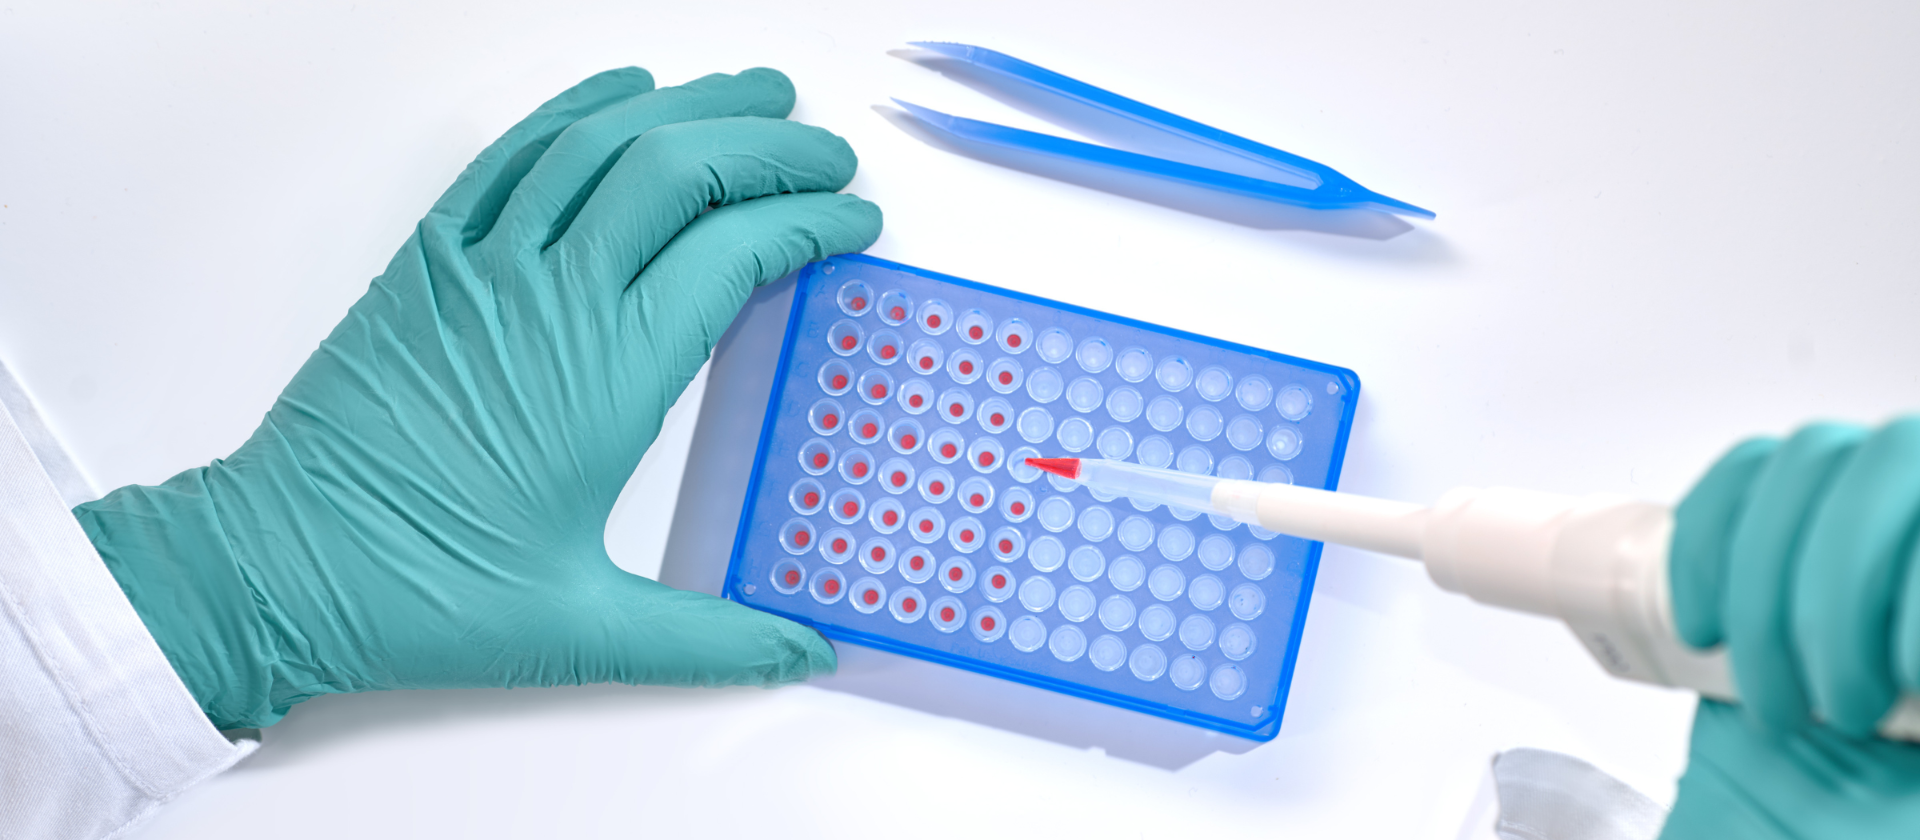 Gloves and a PCR Microplate